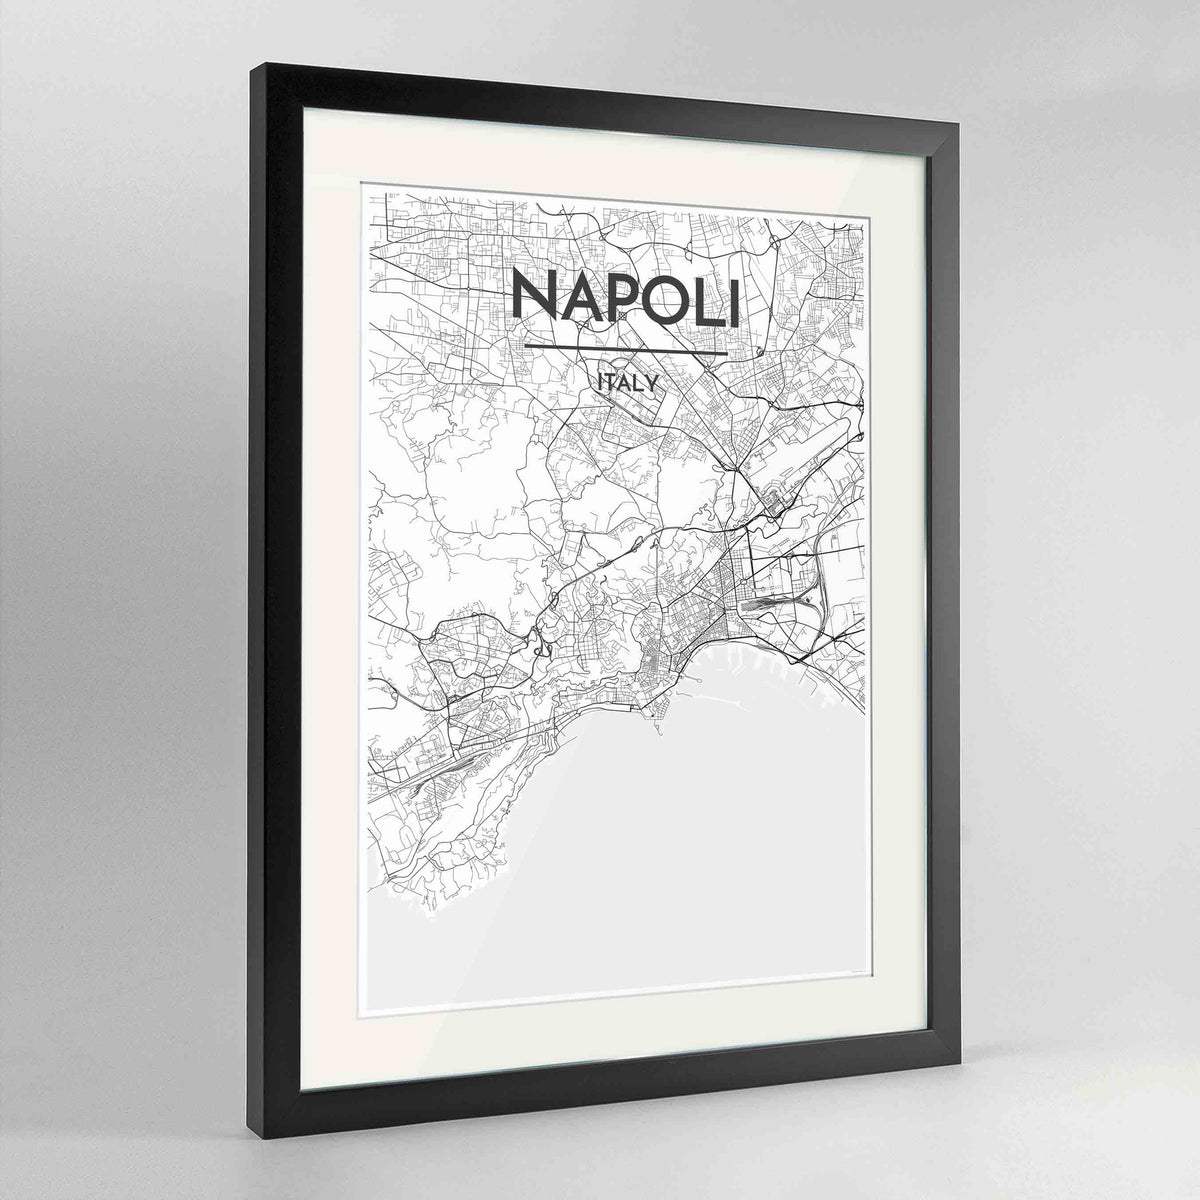 Framed Napoli Map Art Print 24x36&quot; Contemporary Black frame Point Two Design Group